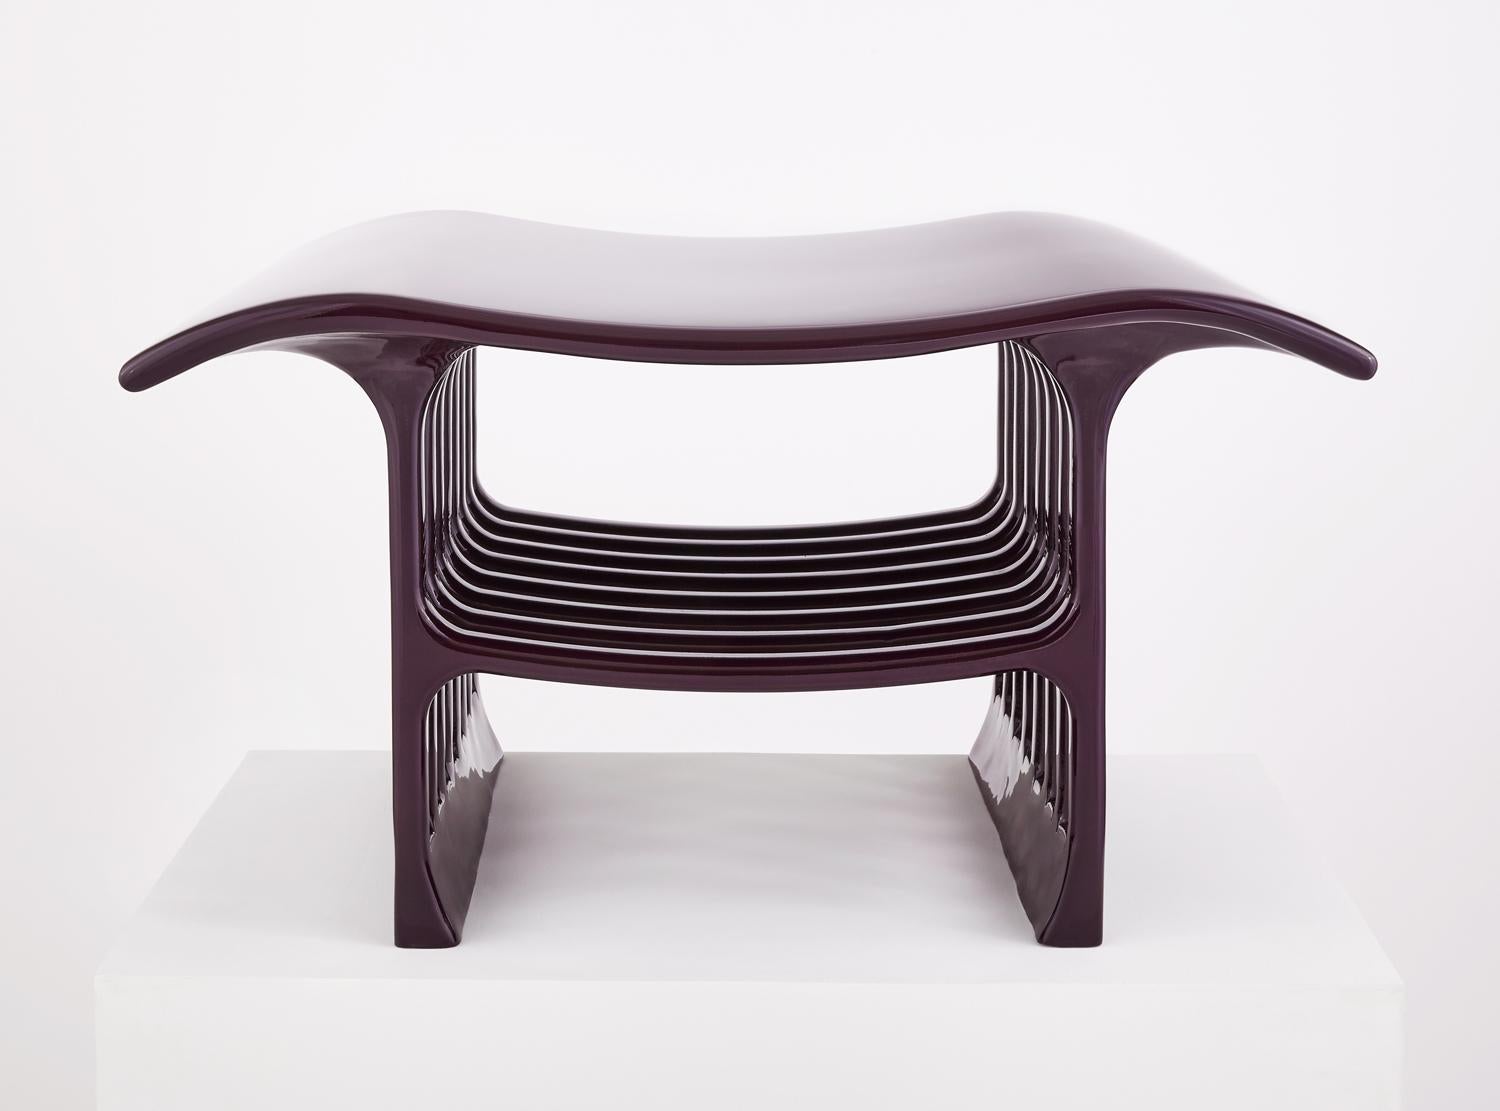 The constant p helps us understand our universe with greater clarity. The PI bench is a tribute to that concept. Constructed of solid wood and painted with an acrylic finish. The repetitive pattern is reminiscent of architectural elements found in